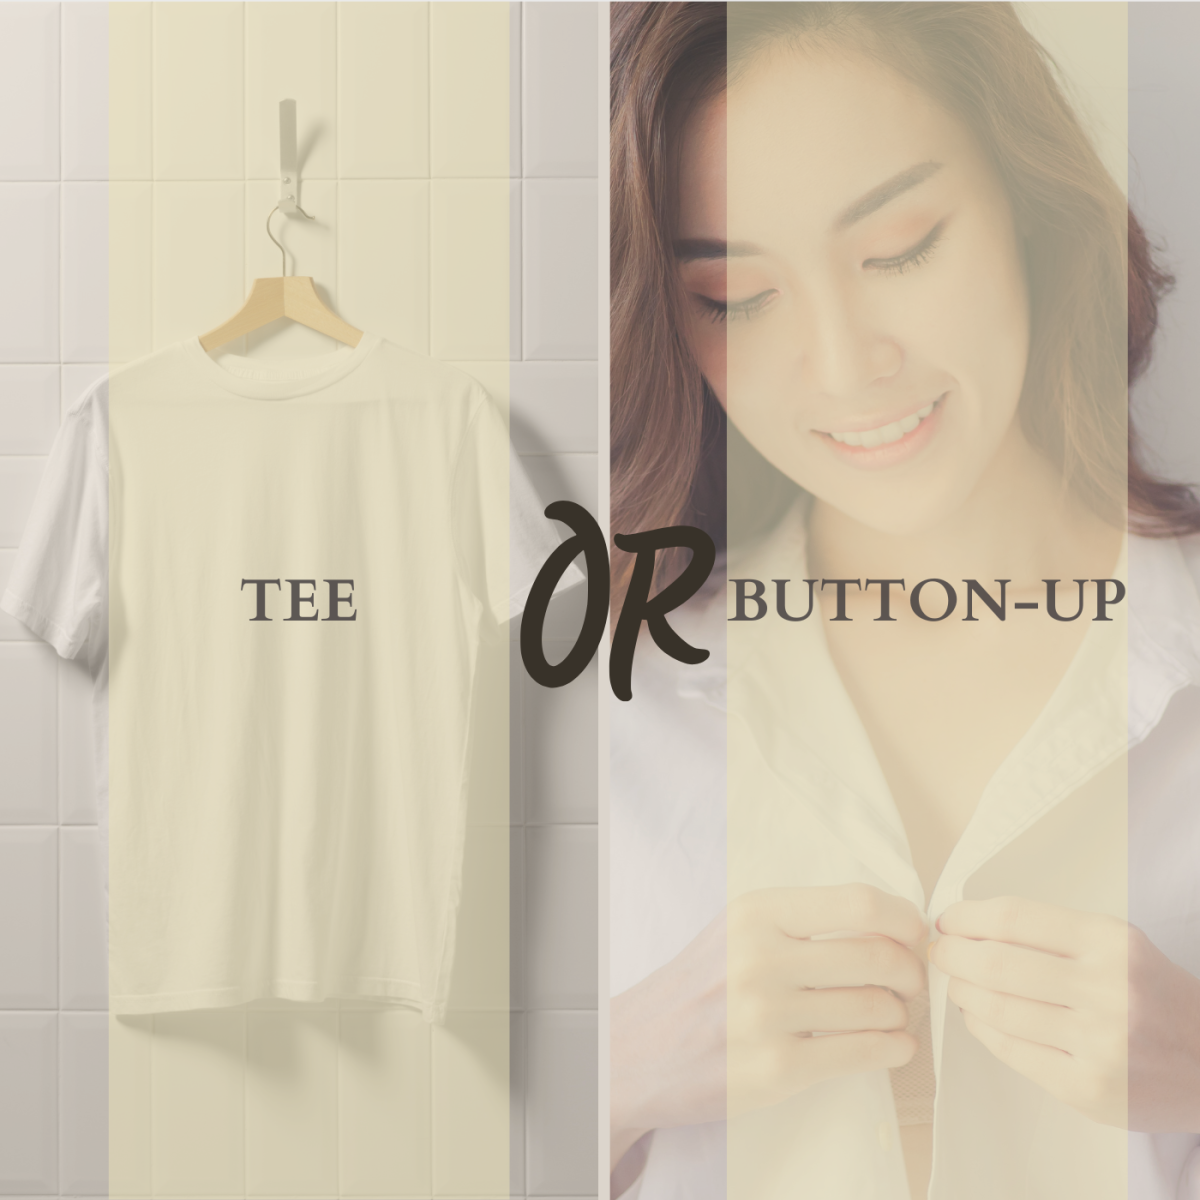 Tee or button-up?